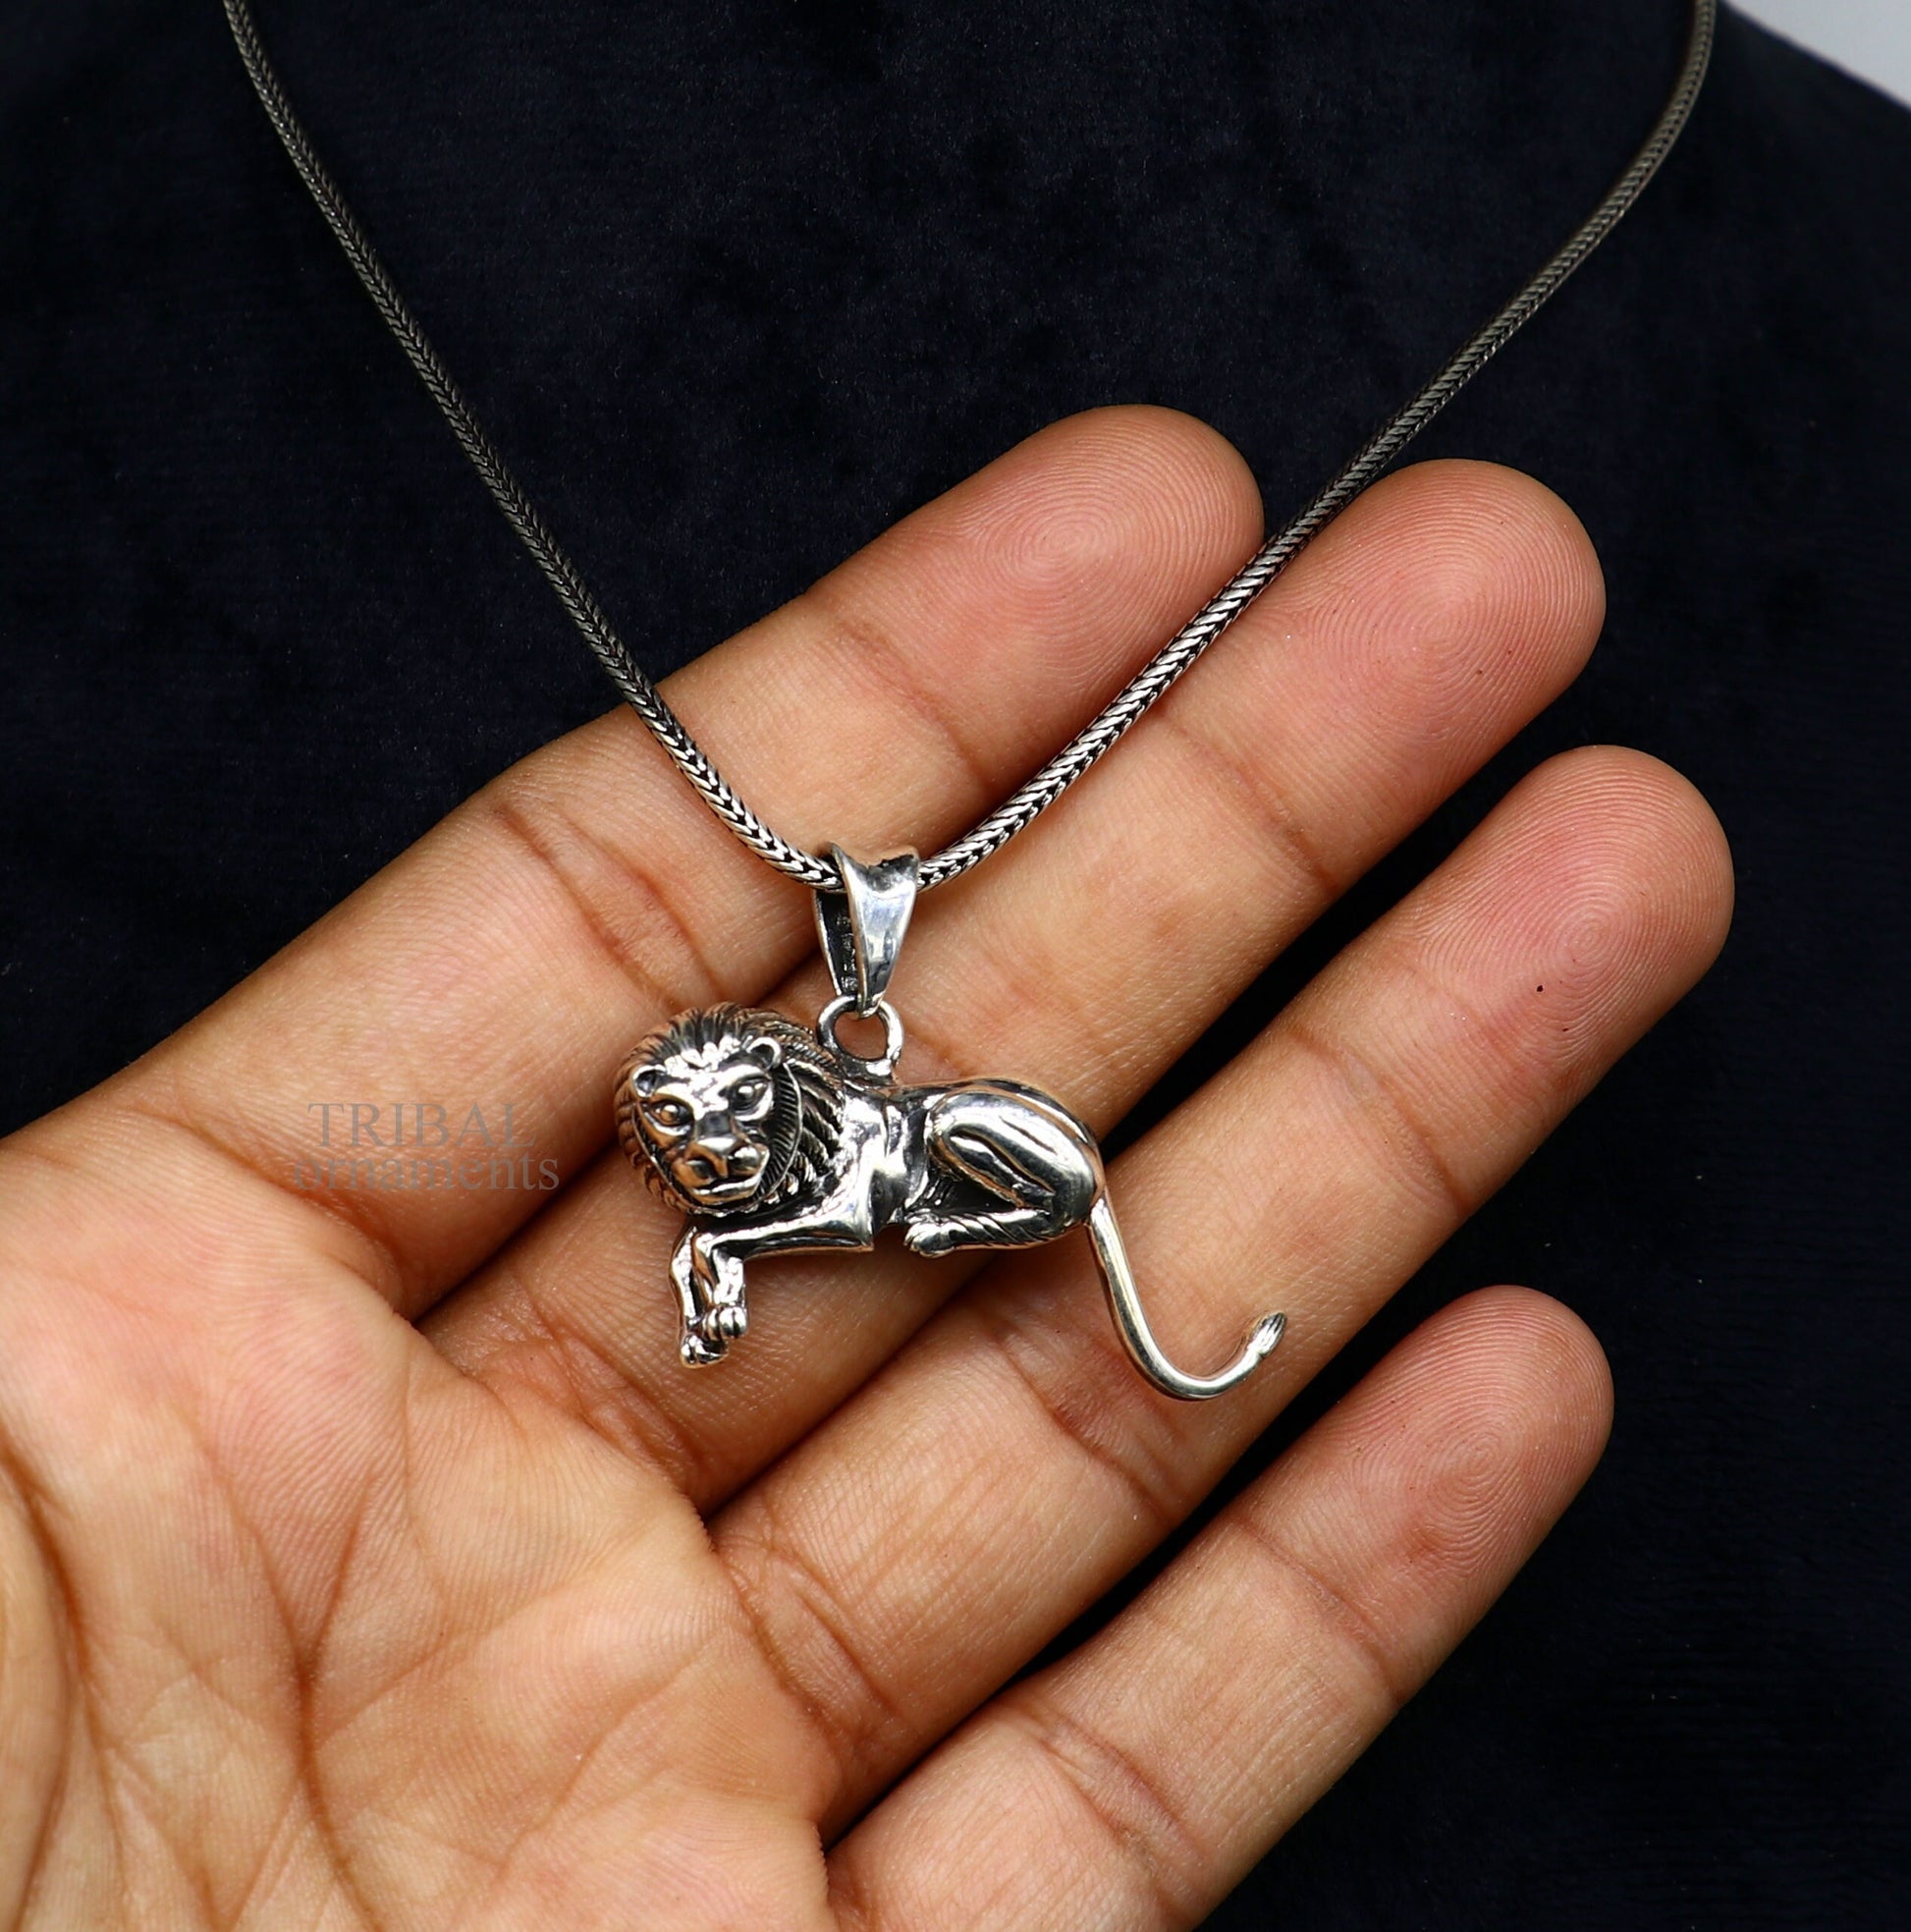 Amazing unique Elegant 925 sterling silver handmade lion design pendant solid pendant, best unisex gifting jewelry from india ssp1461 - TRIBAL ORNAMENTS